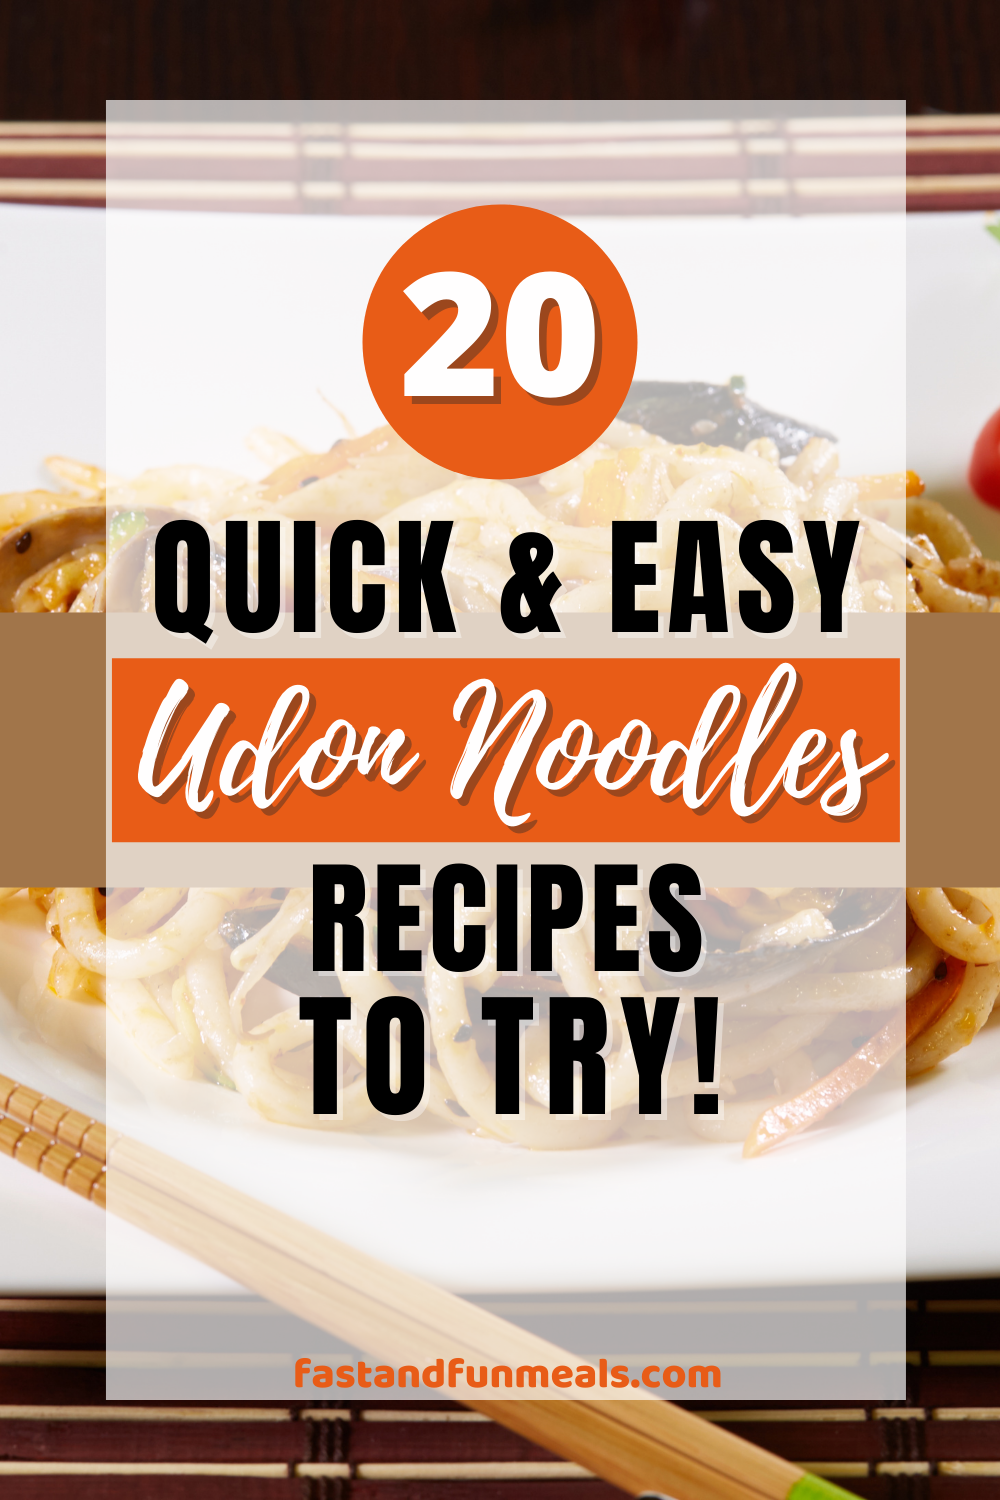 Pin showing the title 20 Quick and Easy Udon Noodles Recipes to try!